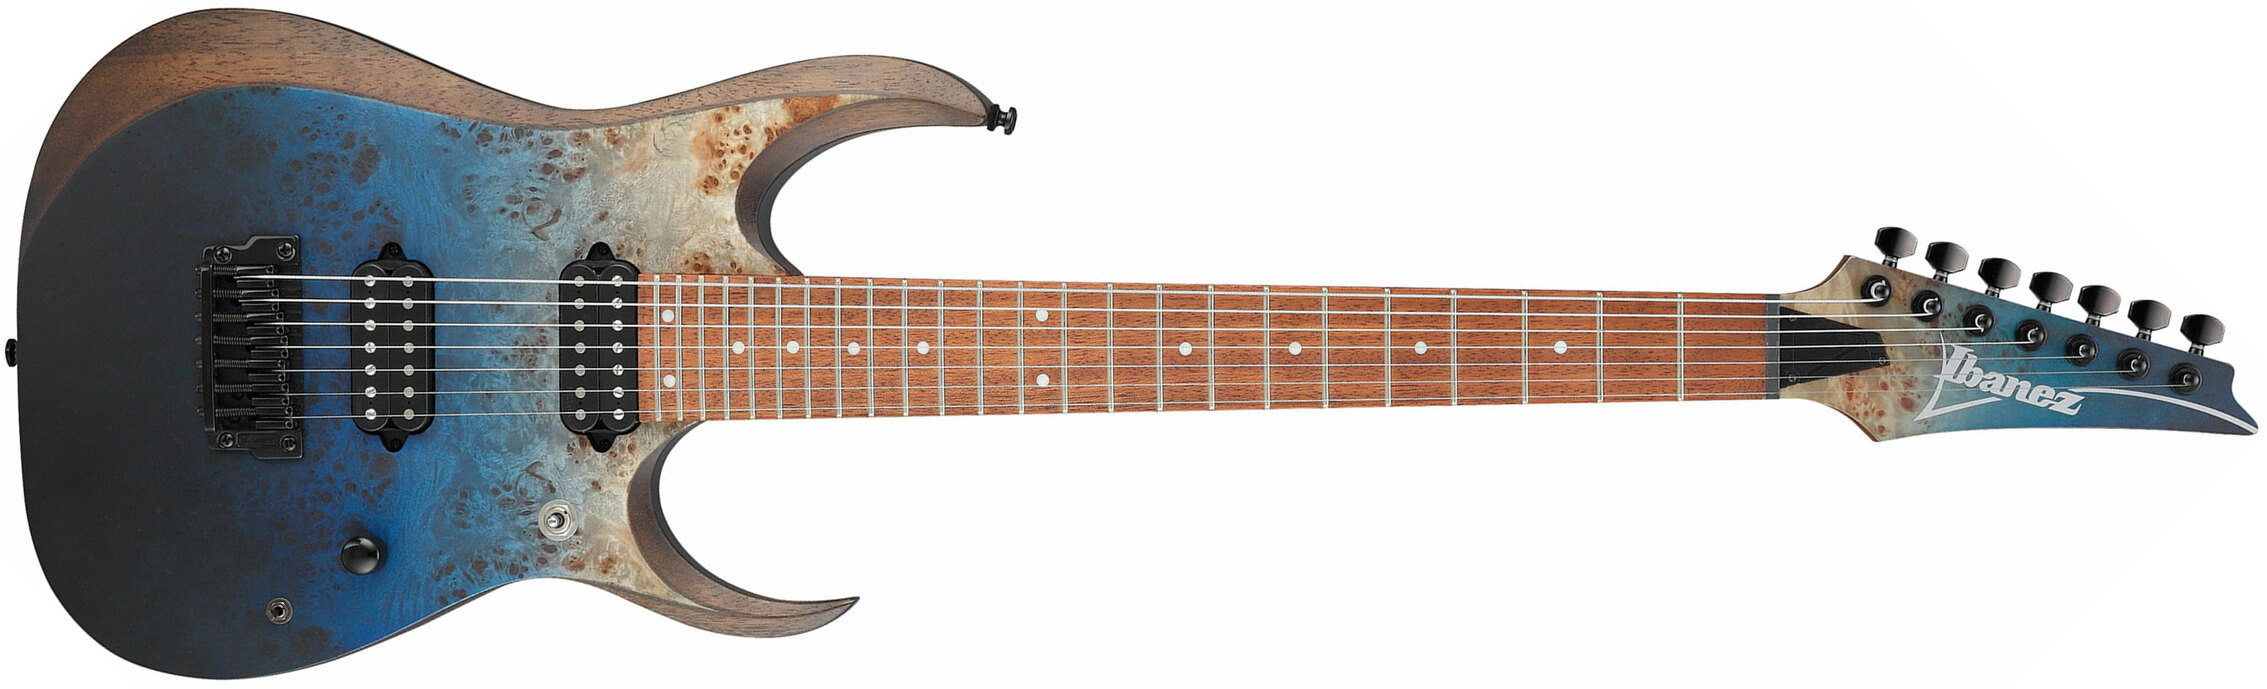 Ibanez Rgd7521pb Dsf Standard 7c Baryton 2h Dimarzio Ht Jat - Deep Seafloor Fade - 7 string electric guitar - Main picture